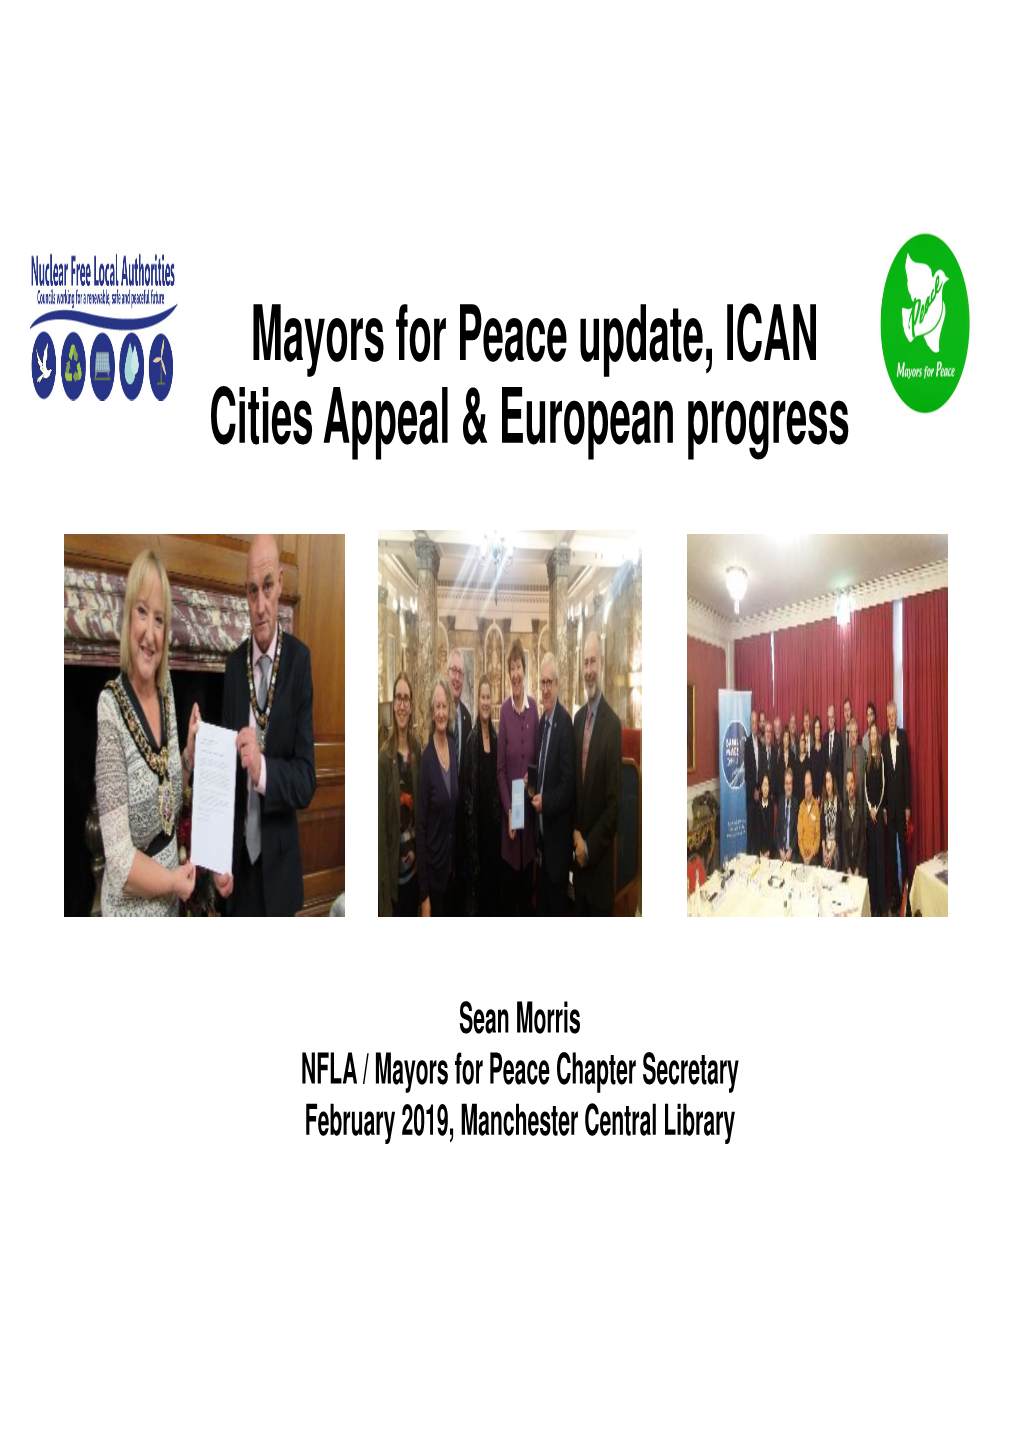 Mayors for Peace Update, ICAN Cities Appeal & European Progress